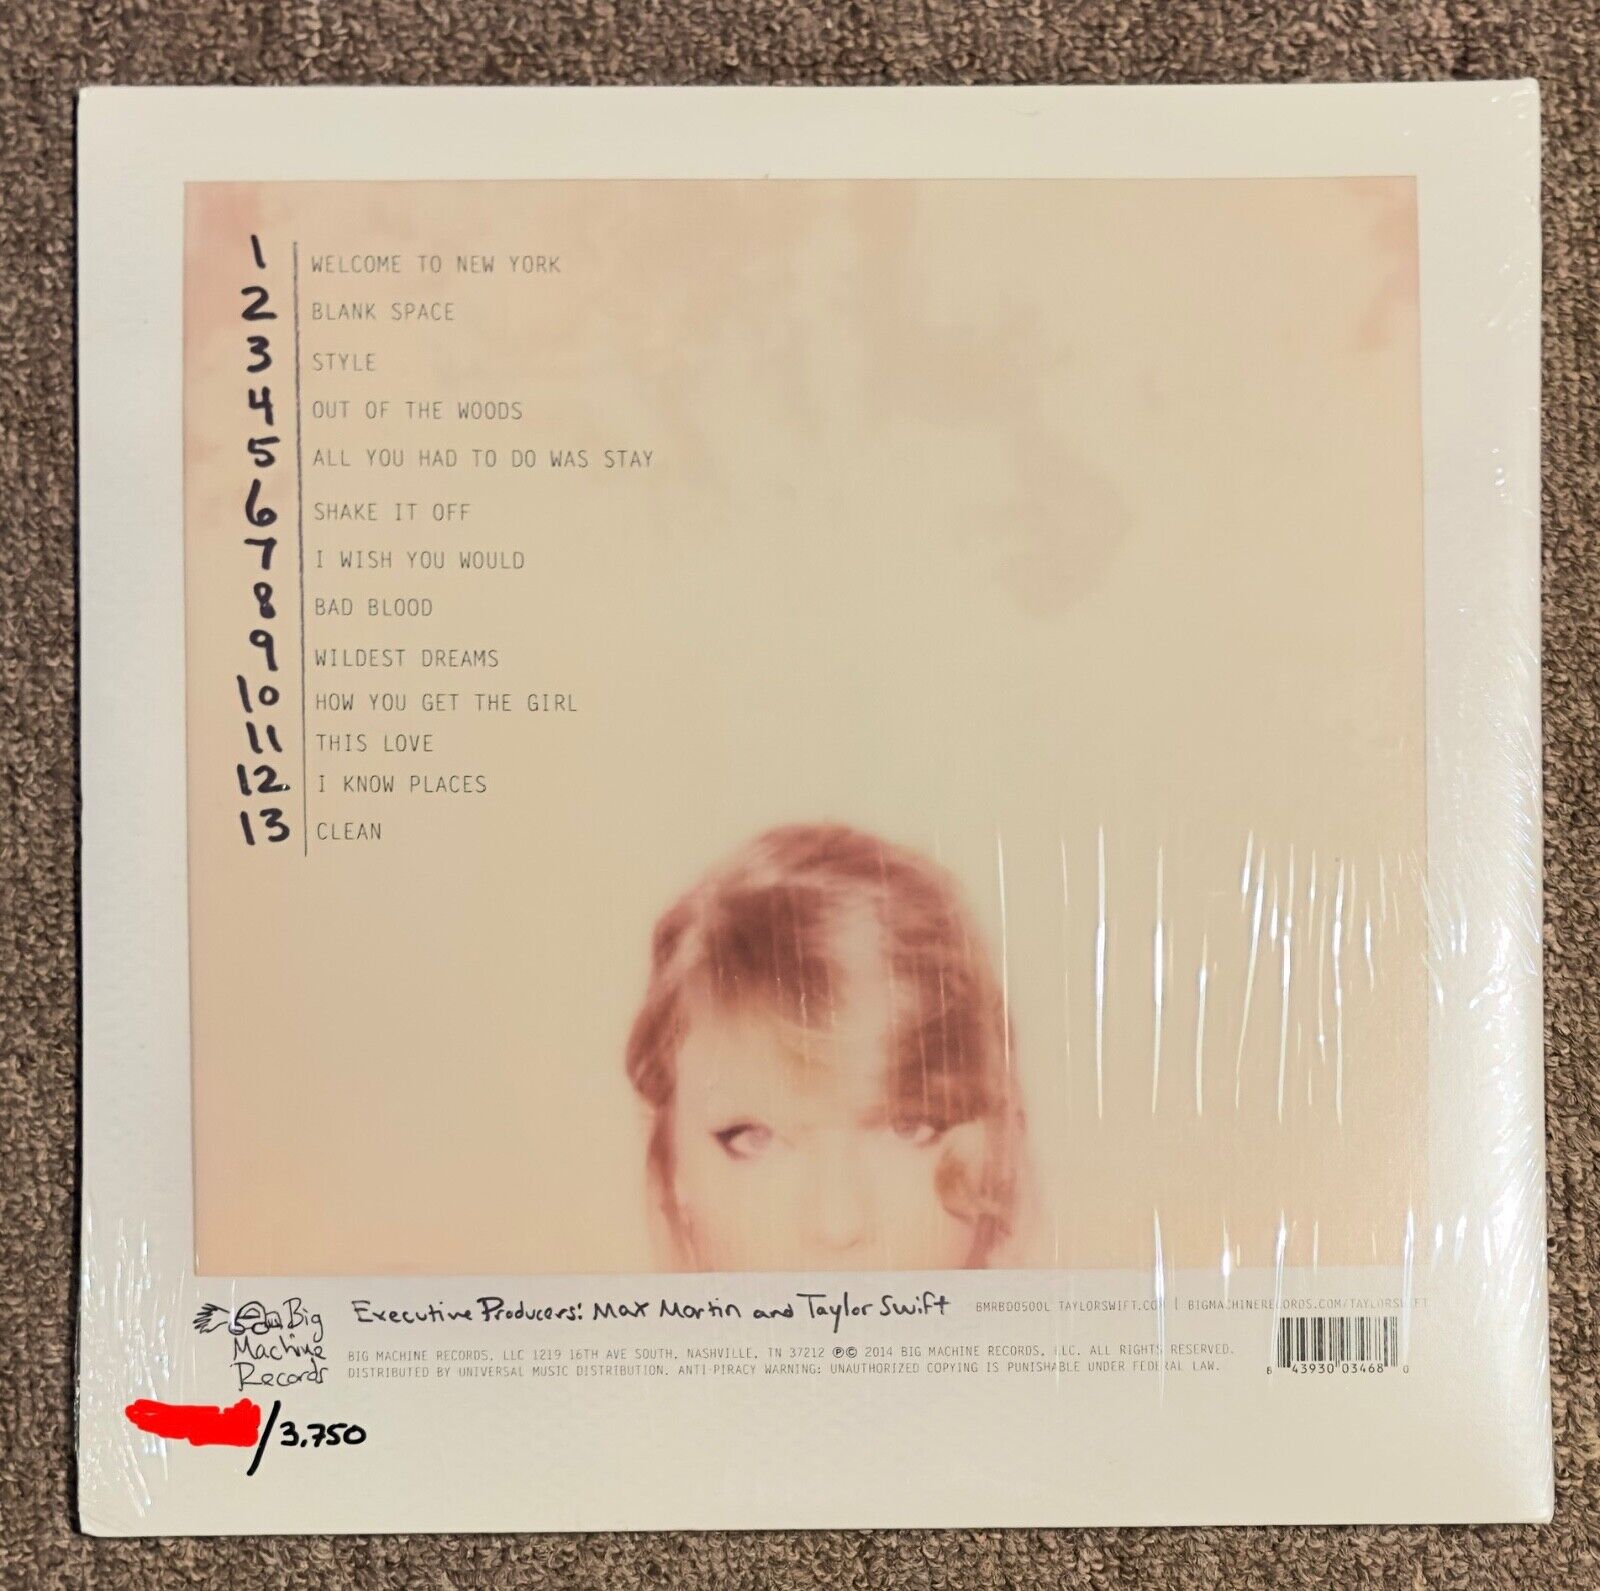 Pic 1 Taylor Swift - 1989 Record Store Day Vinyl -  Pink - Sealed New